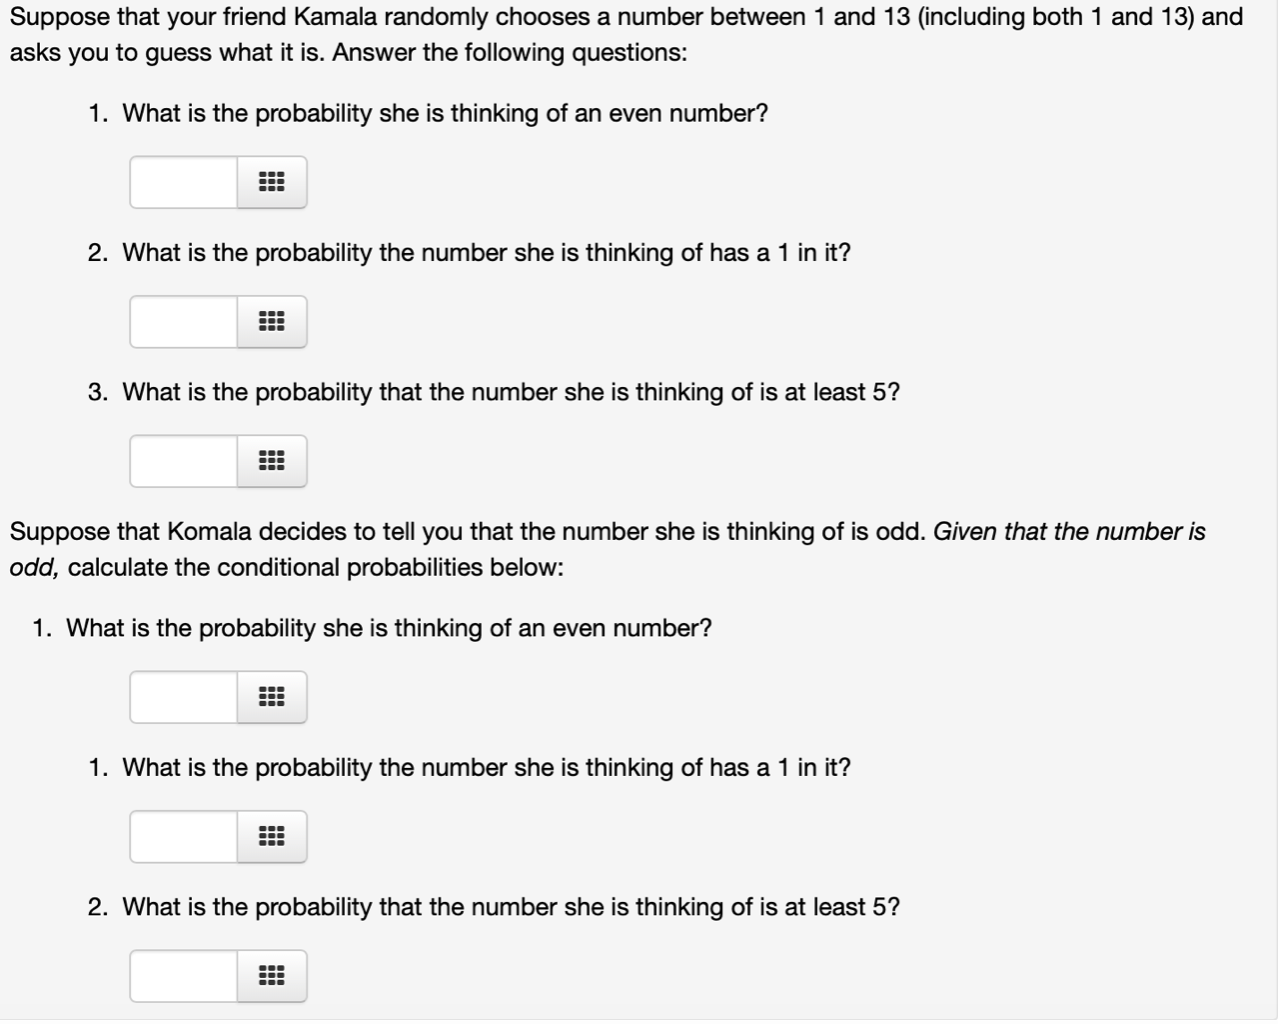 Suppose that your friend Kamala randomly chooses a number between 1 and 13 (including both 1 and 13) and
asks you to guess what it is. Answer the following questions:
1. What is the probability she is thinking of an even number?
2. What is the probability the number she is thinking of has a 1 in it?
3. What is the probability that the number she is thinking of is at least 5?
Suppose that Komala decides to tell you that the number she is thinking of is odd. Given that the number is
odd, calculate the conditional probabilities below:
1. What is the probability she is thinking of an even number?
1. What is the probability the number she is thinking of has a 1 in it?
2. What is the probability that the number she is thinking of is at least 5?
